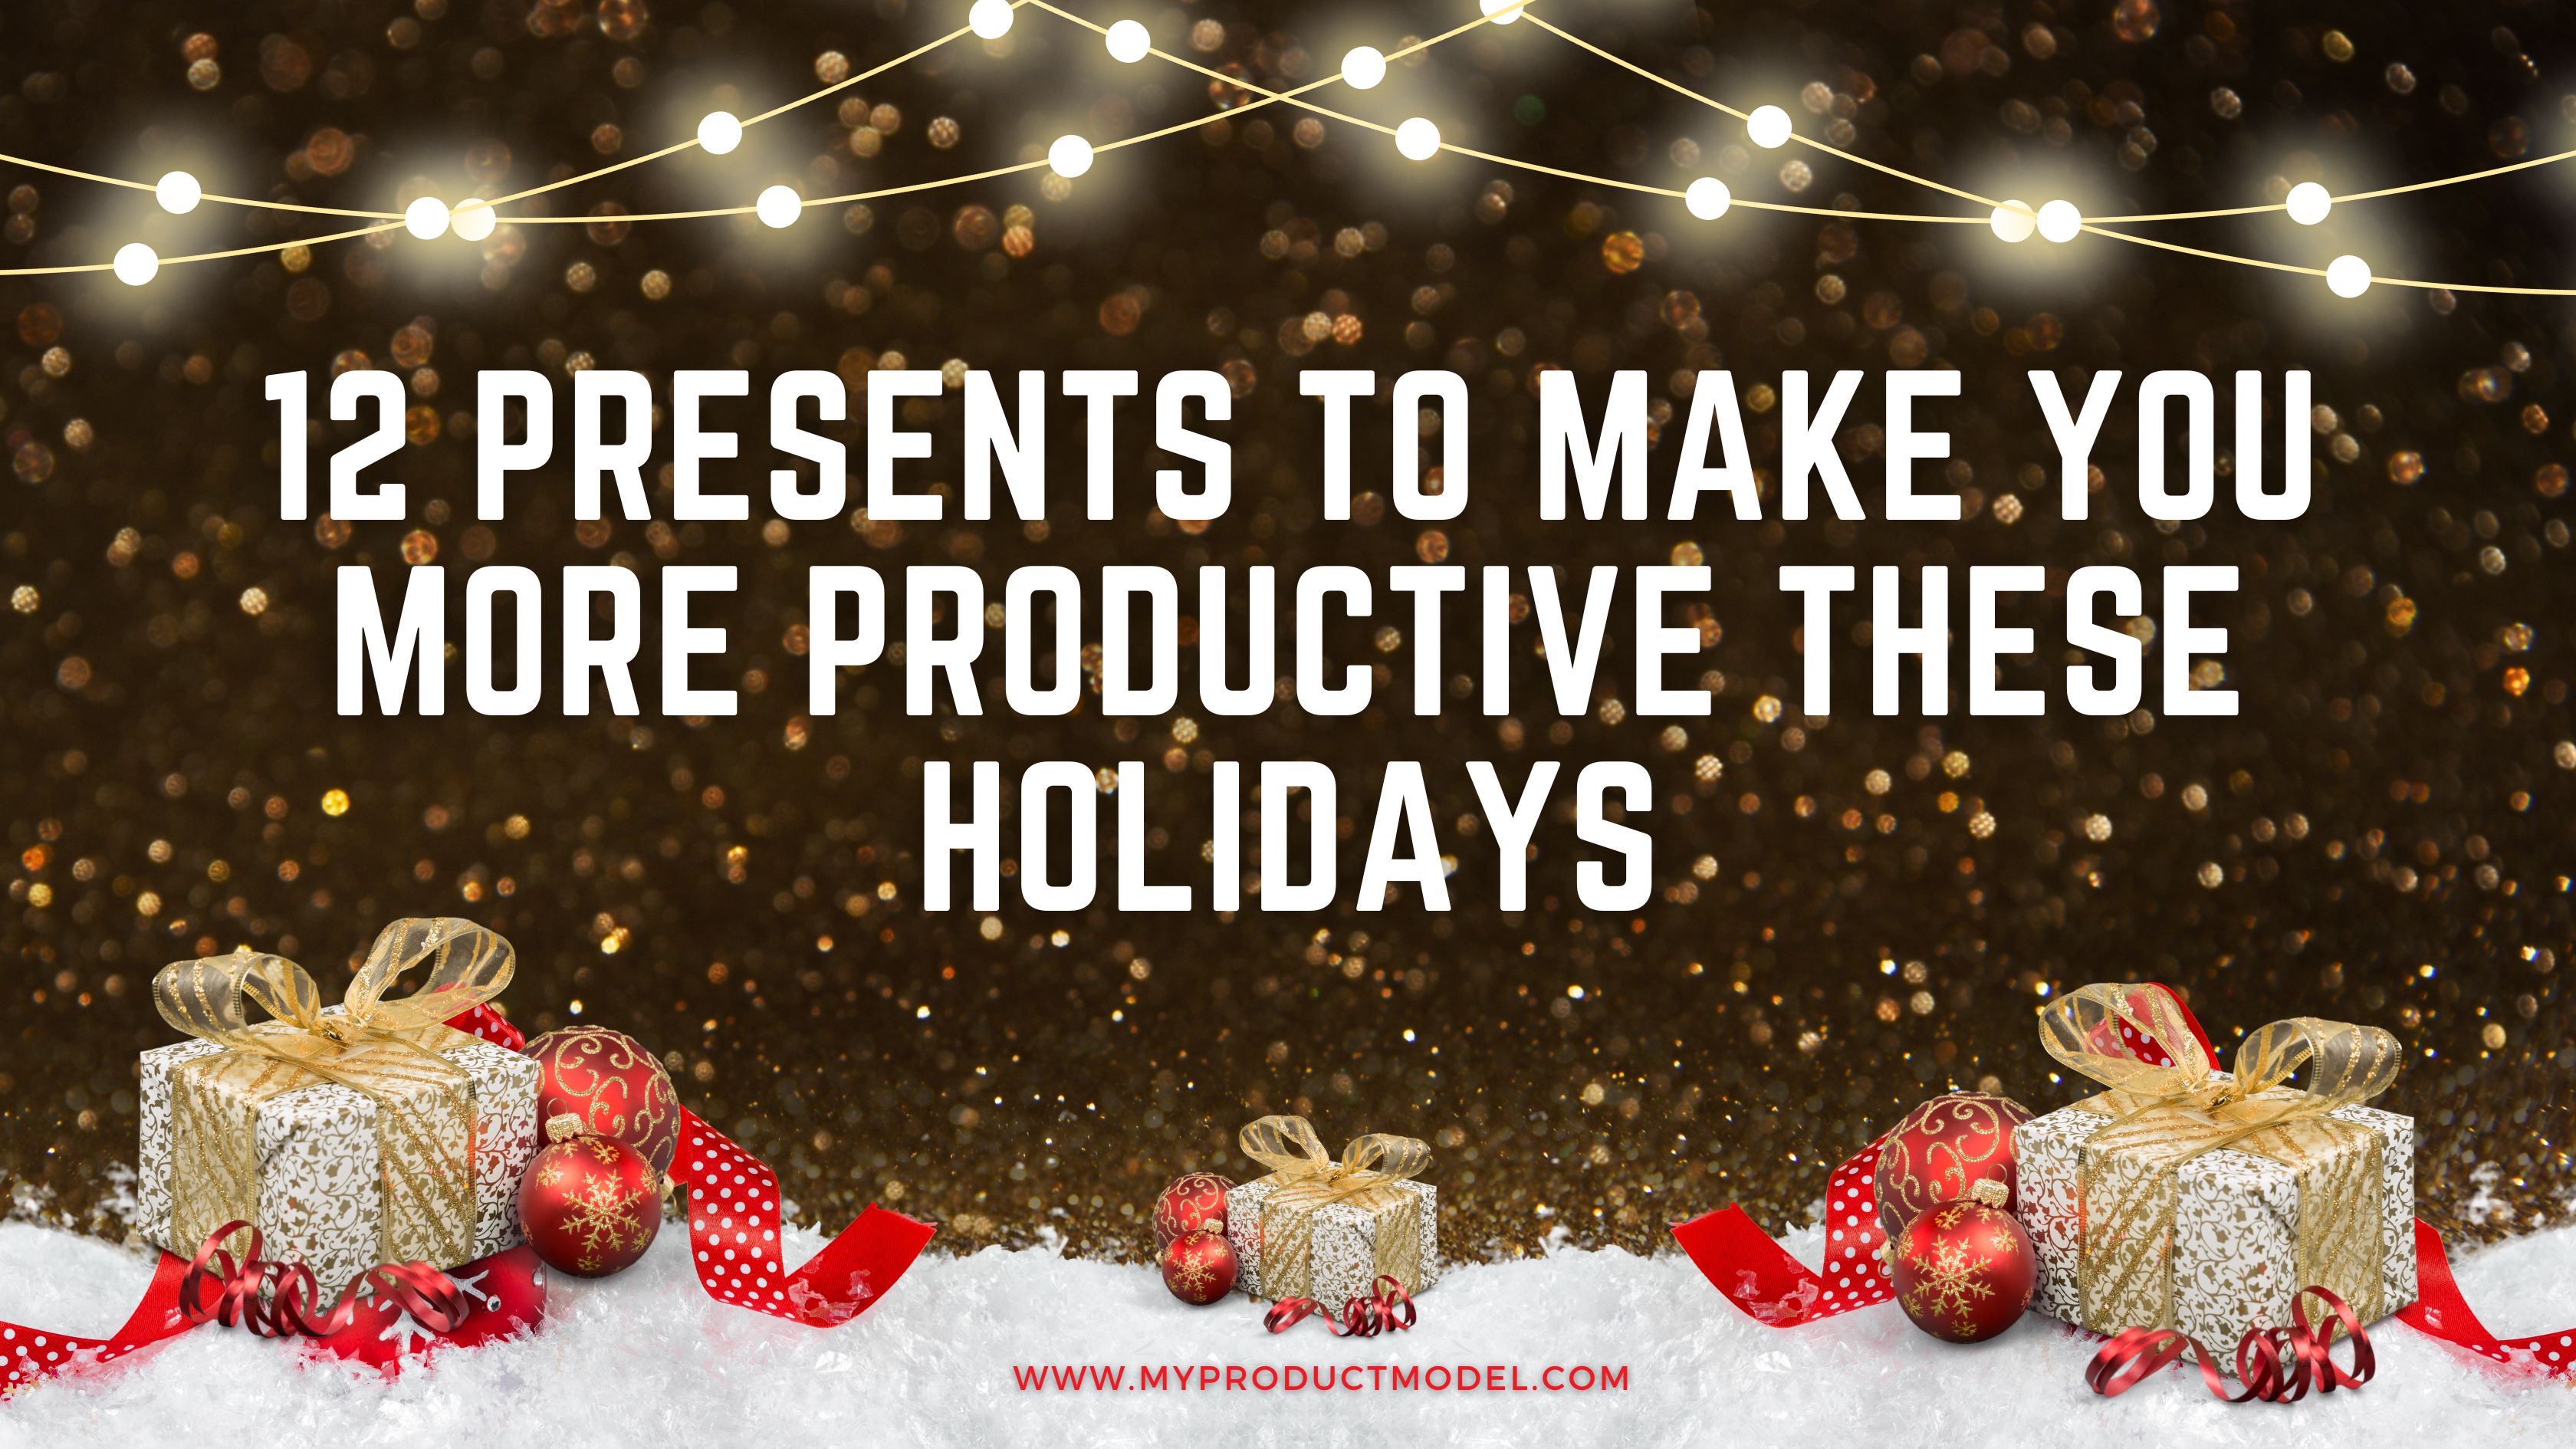 12 Presents To Make You More Productive These Holidays